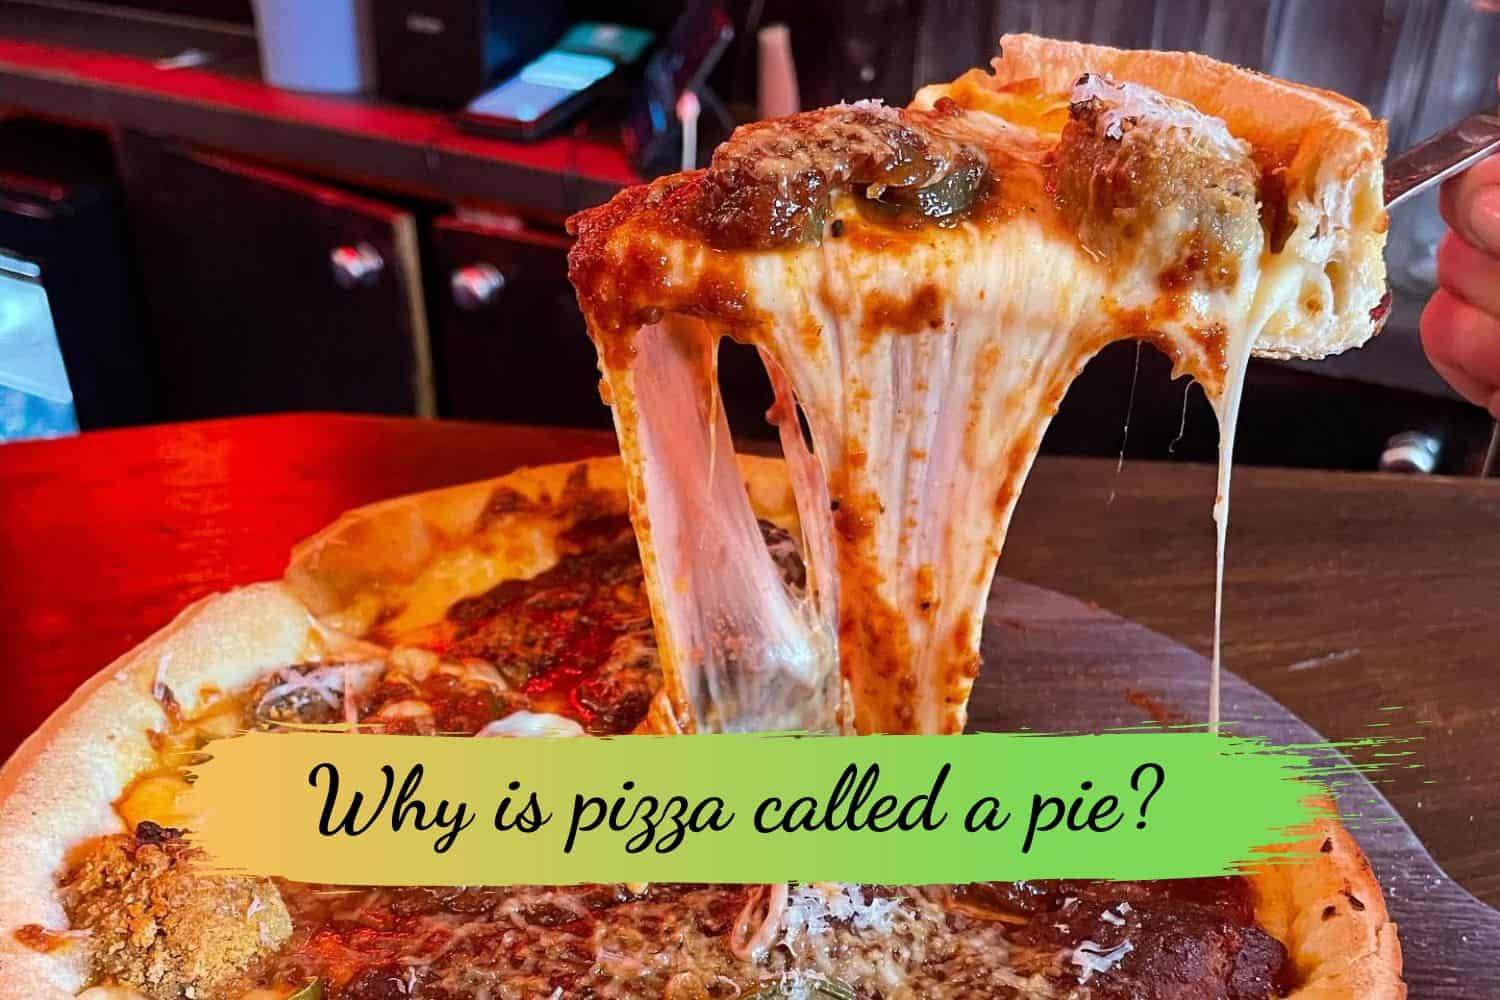 Why is pizza called a pie?